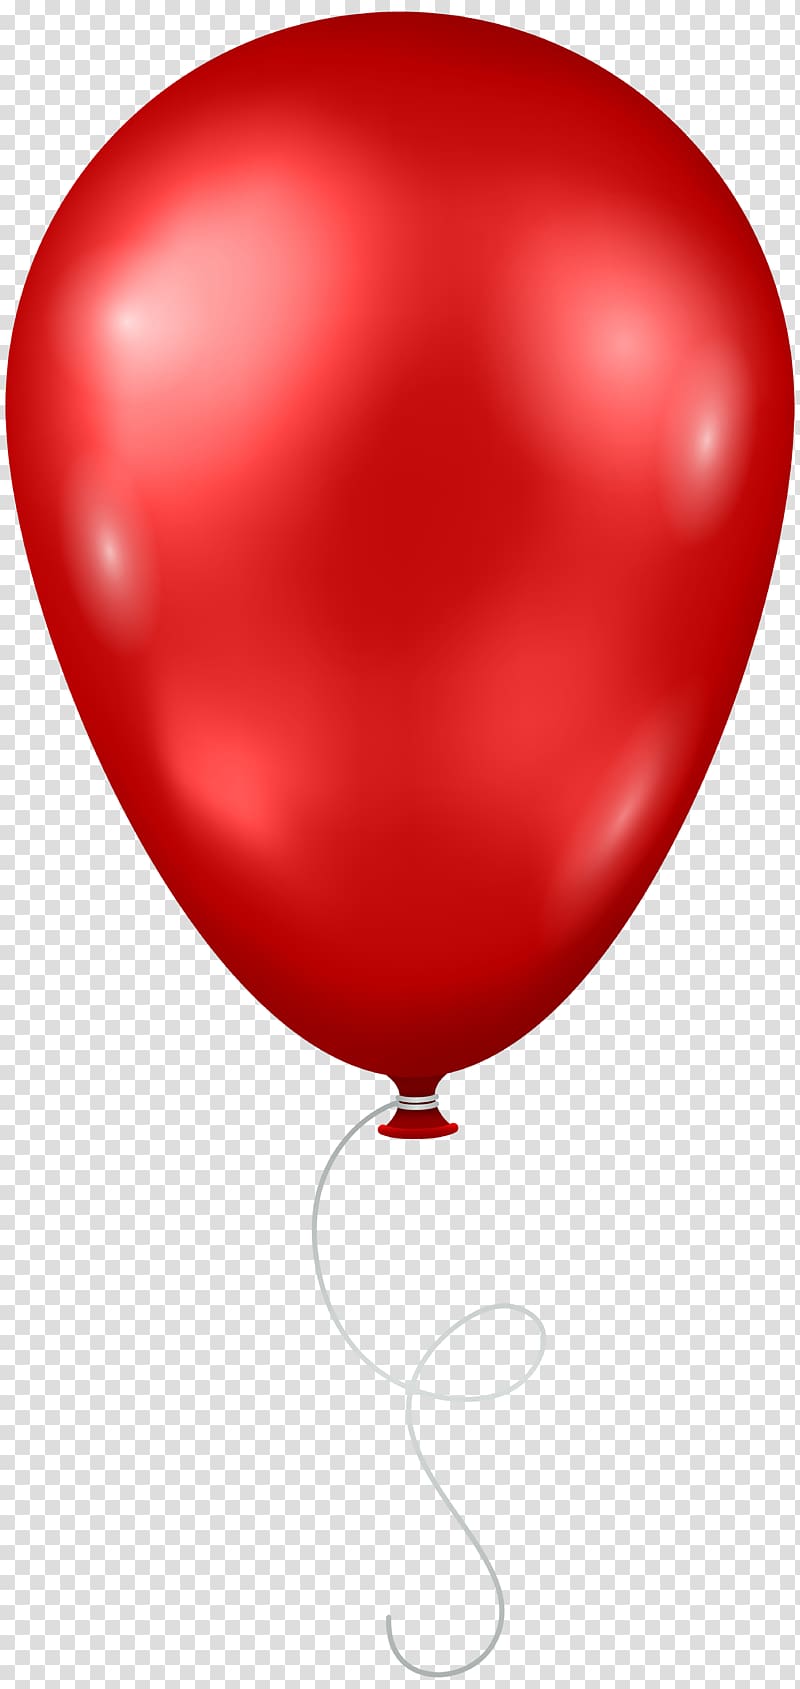 red balloon , file formats Lossless compression, Red Balloon transparent background PNG clipart